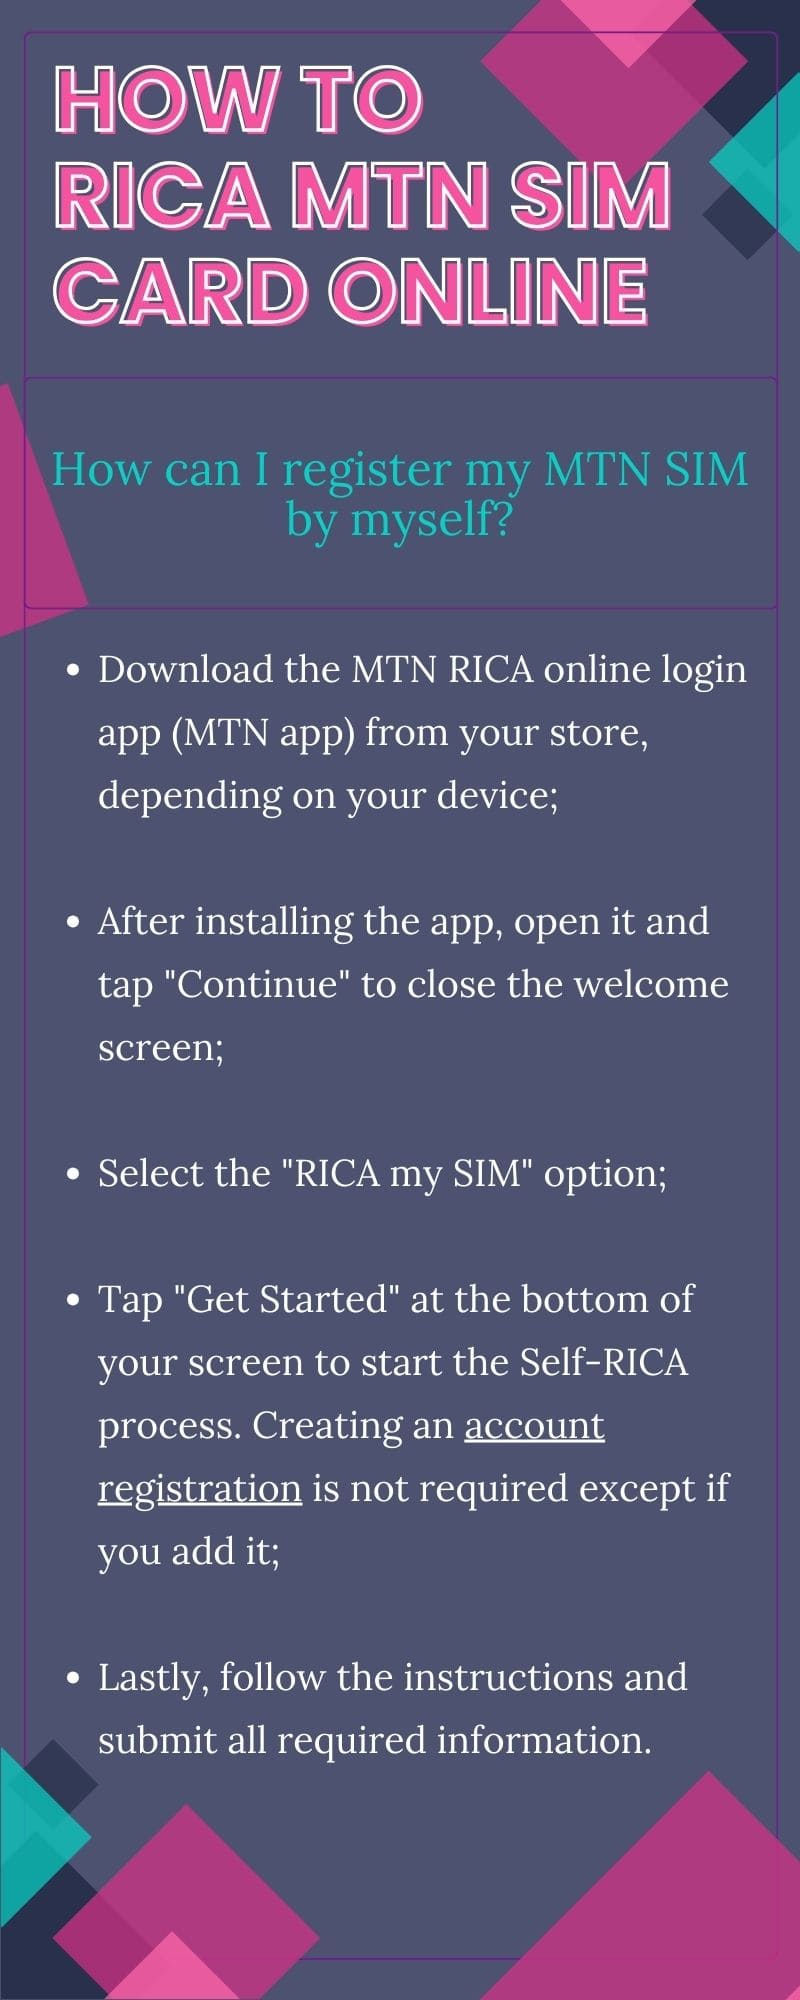 How to RICA MTN sim card online